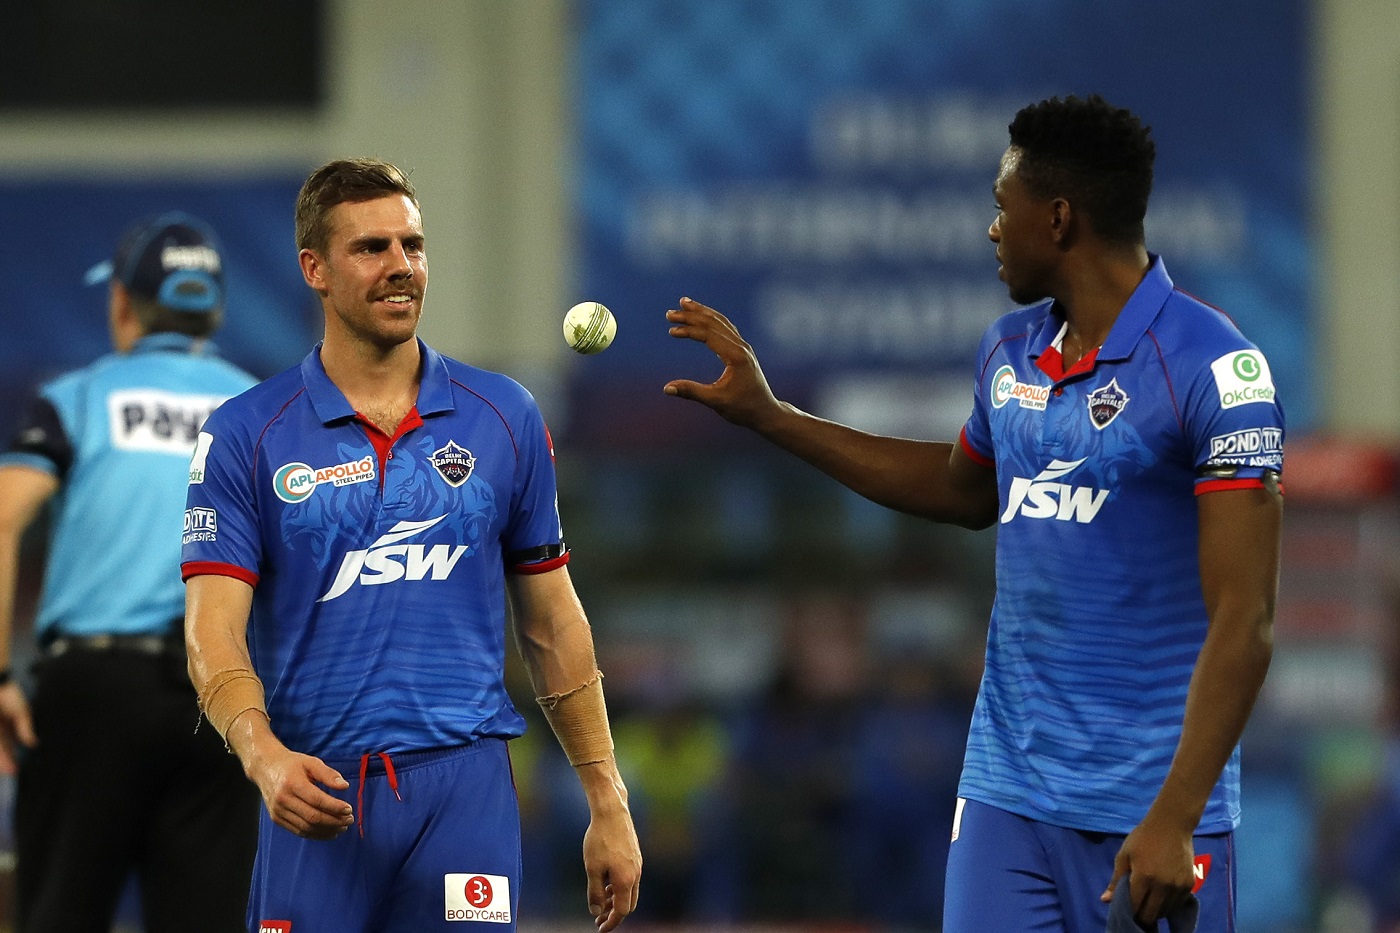 Nortje and Rabada of DC are competing for the tag of fastest bowler of IPL 2020 | BCCI/IPL